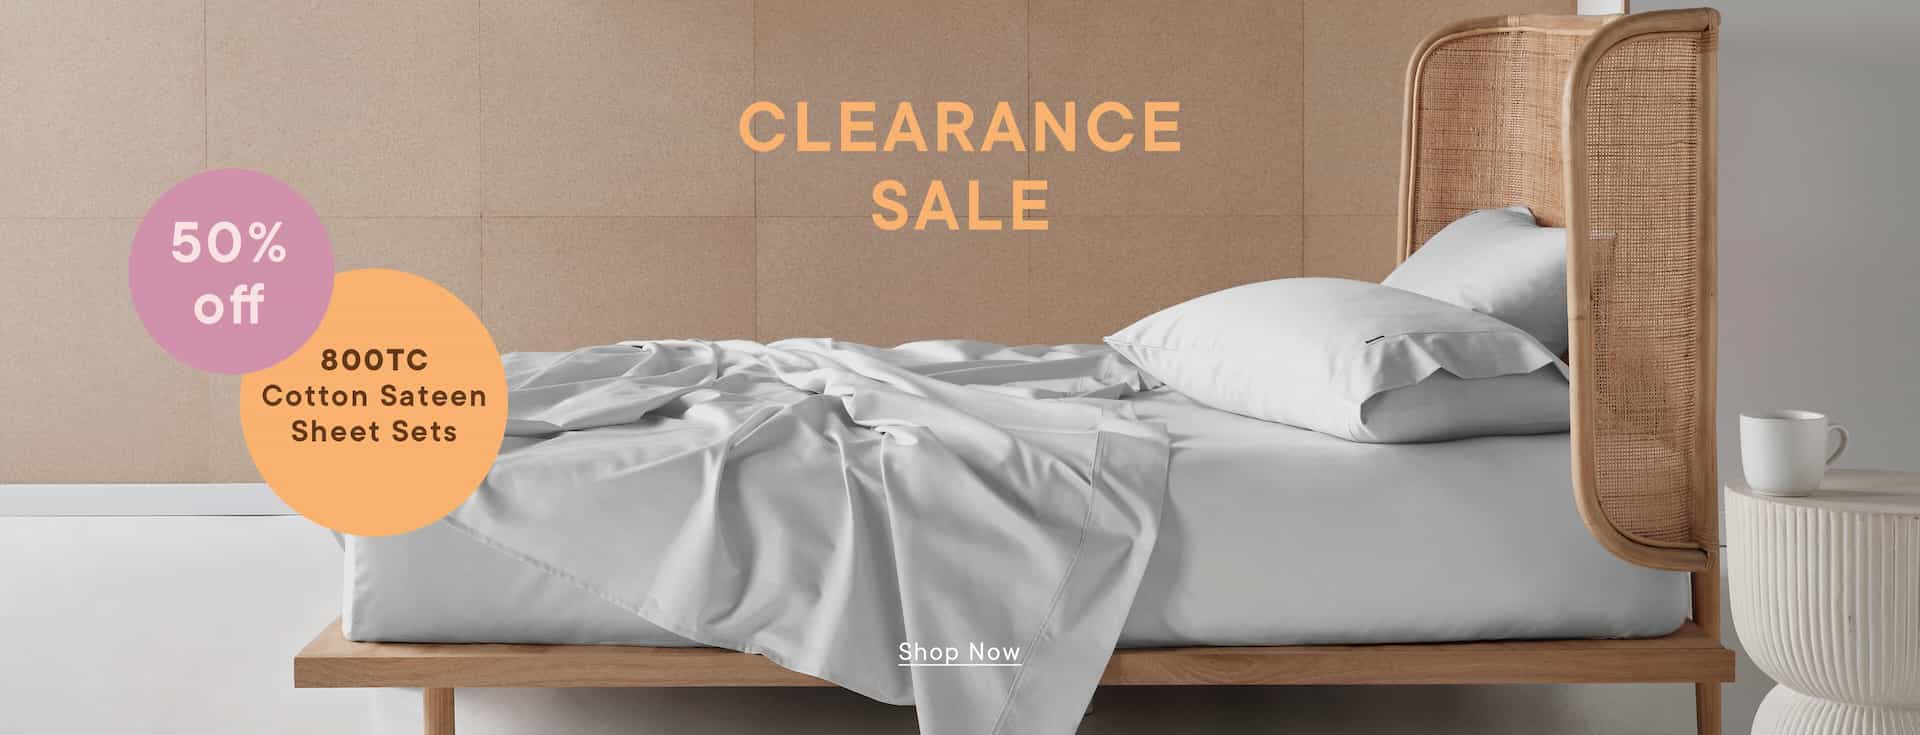 Linen House 50% OFF on clearance sale from sheets, pillows, & more